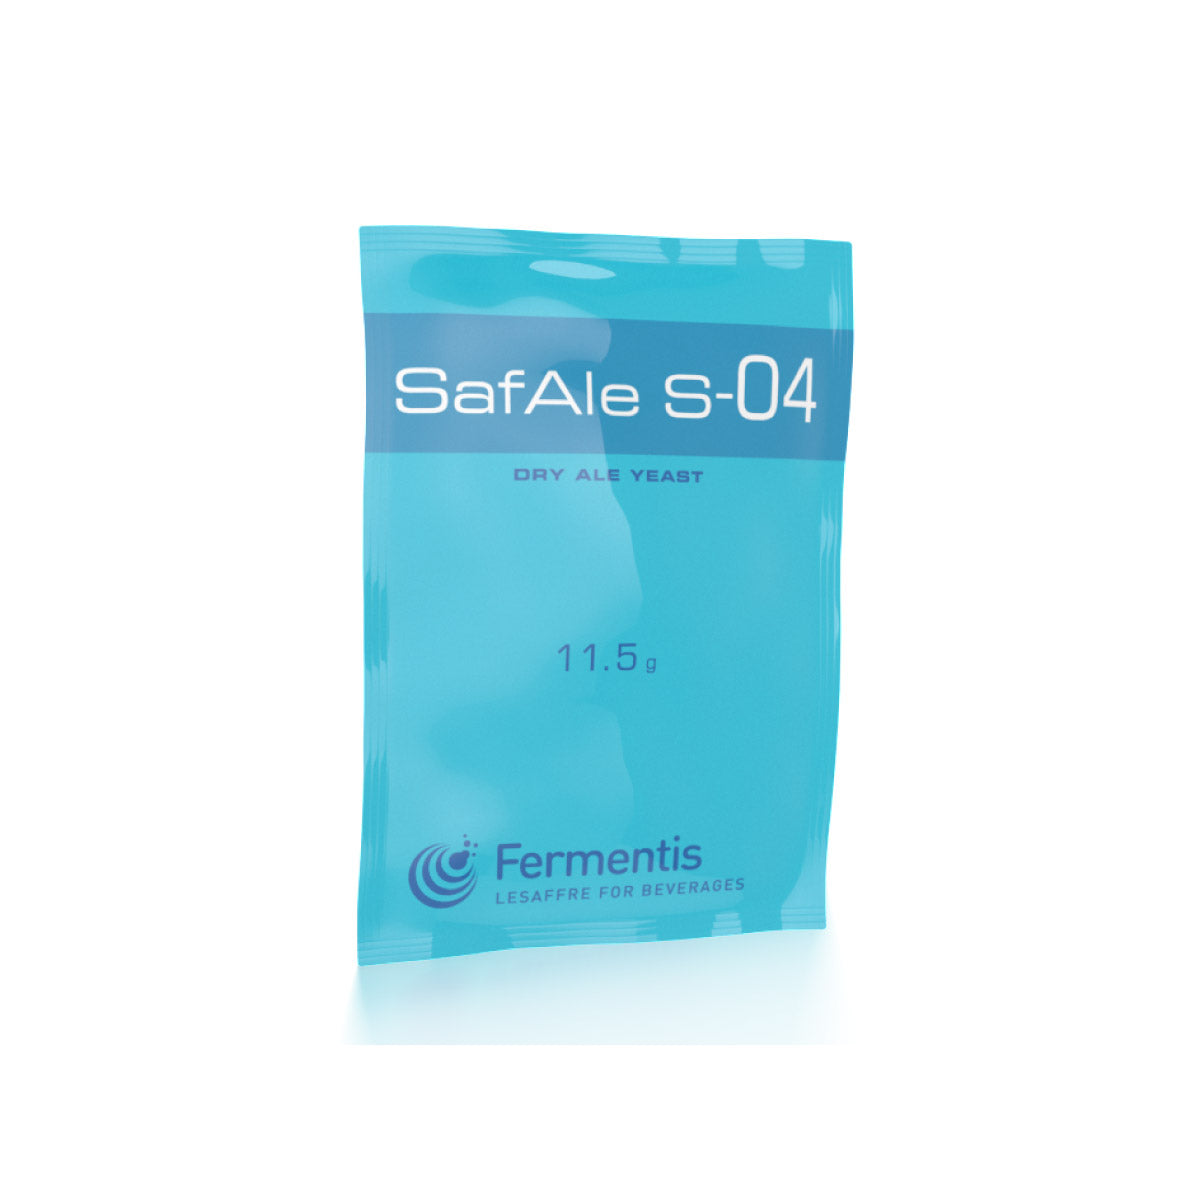 Safale S-04 Dry Ale Yeast - 11.5 Grams